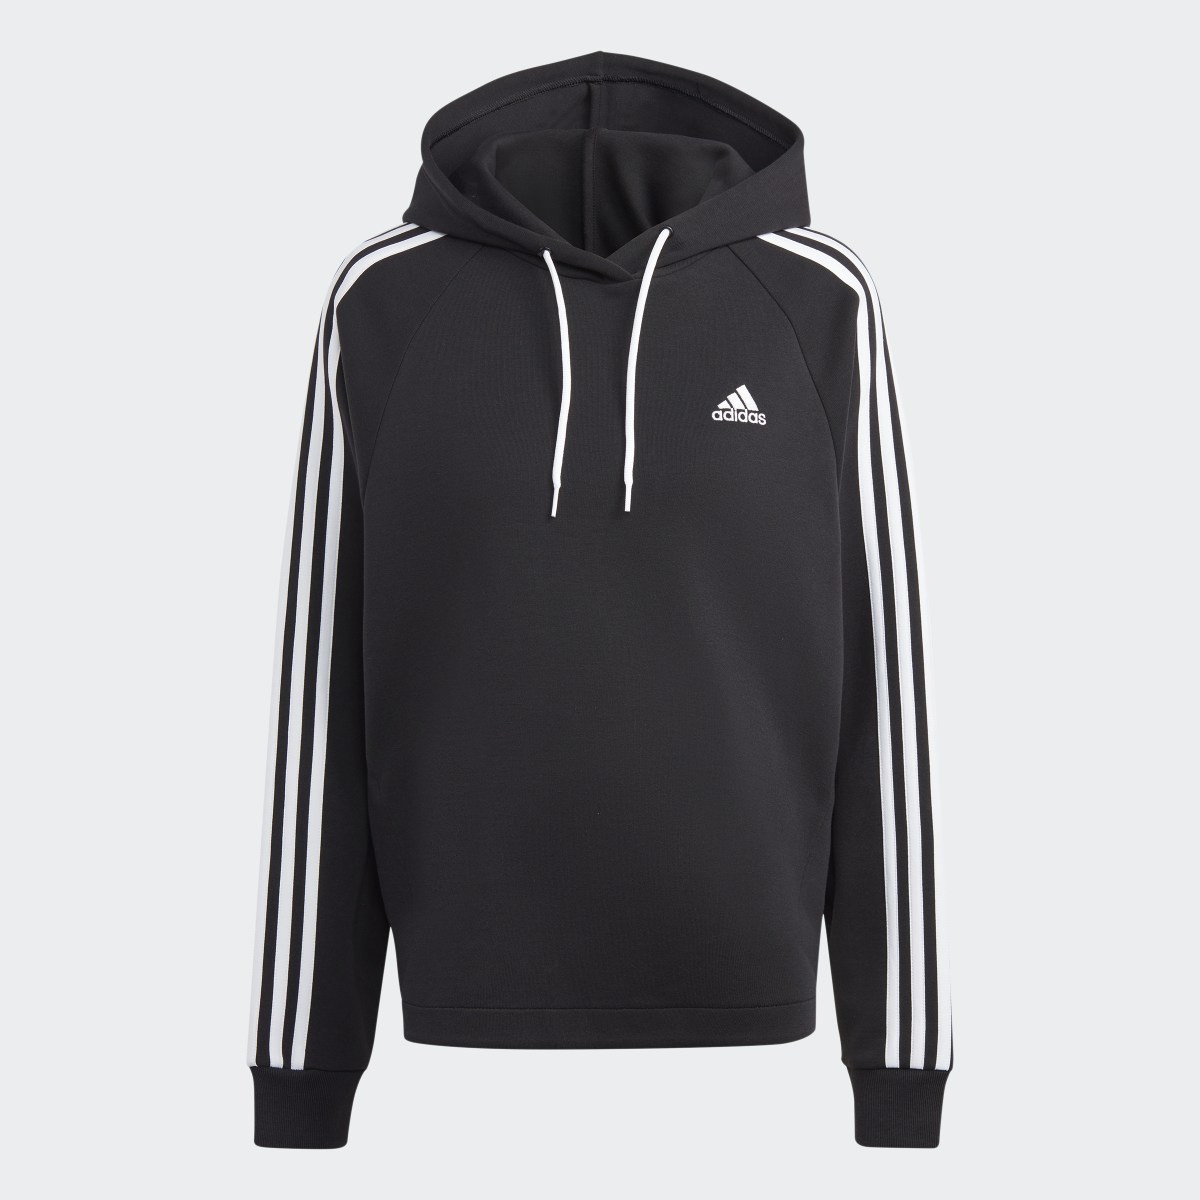 Adidas Maternity Over-the-Head Hoodie. 5